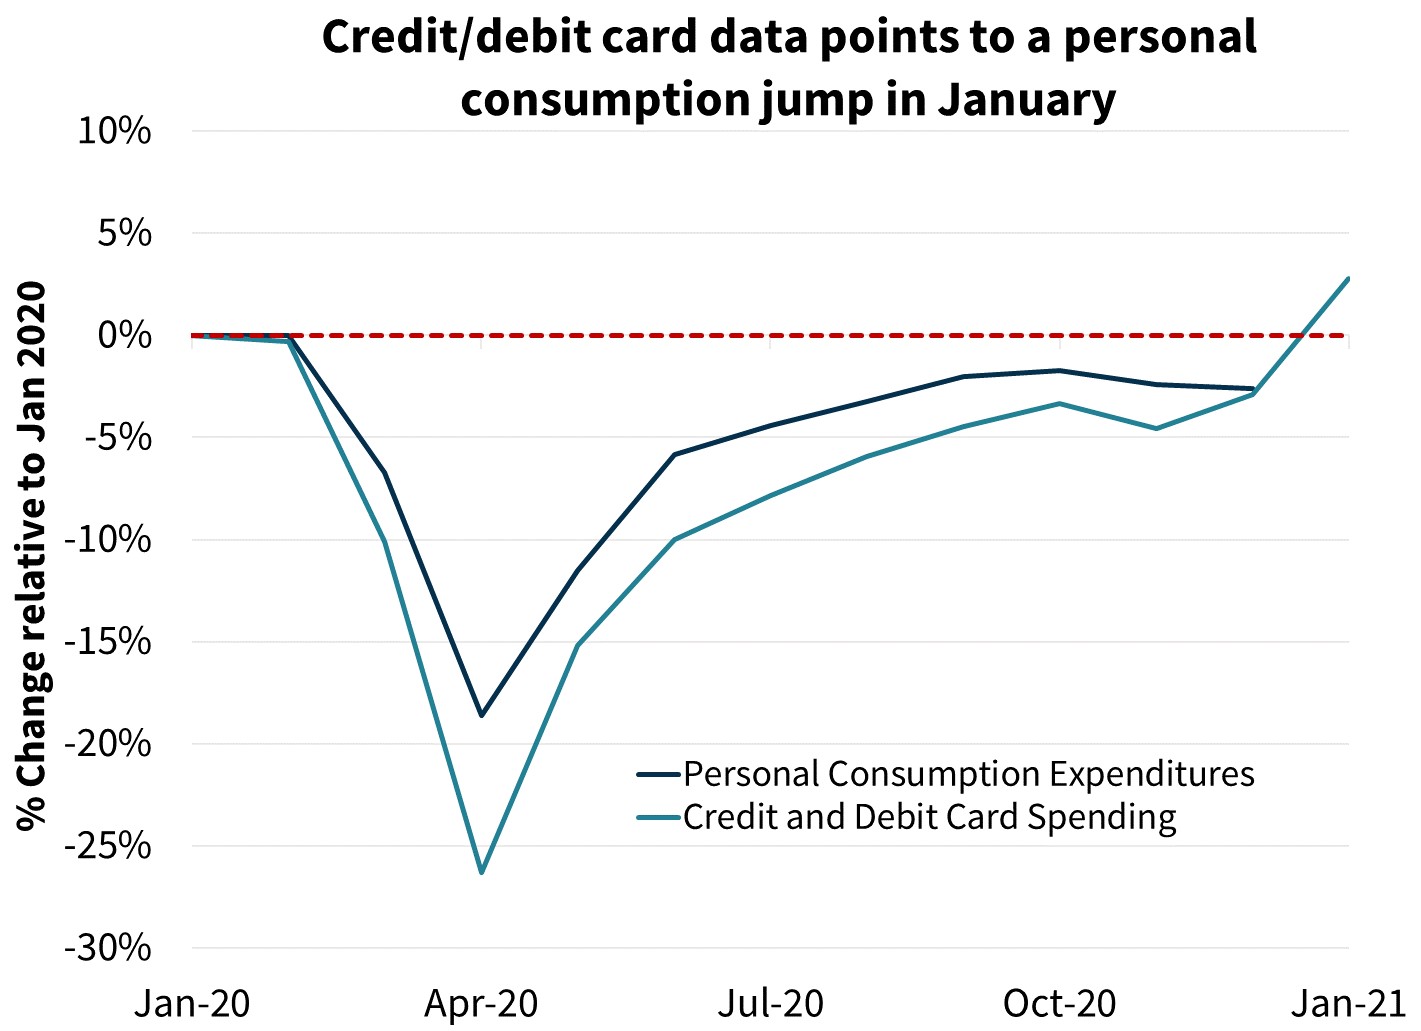 Credit/debit card data points to a personal consumption jump in January
 